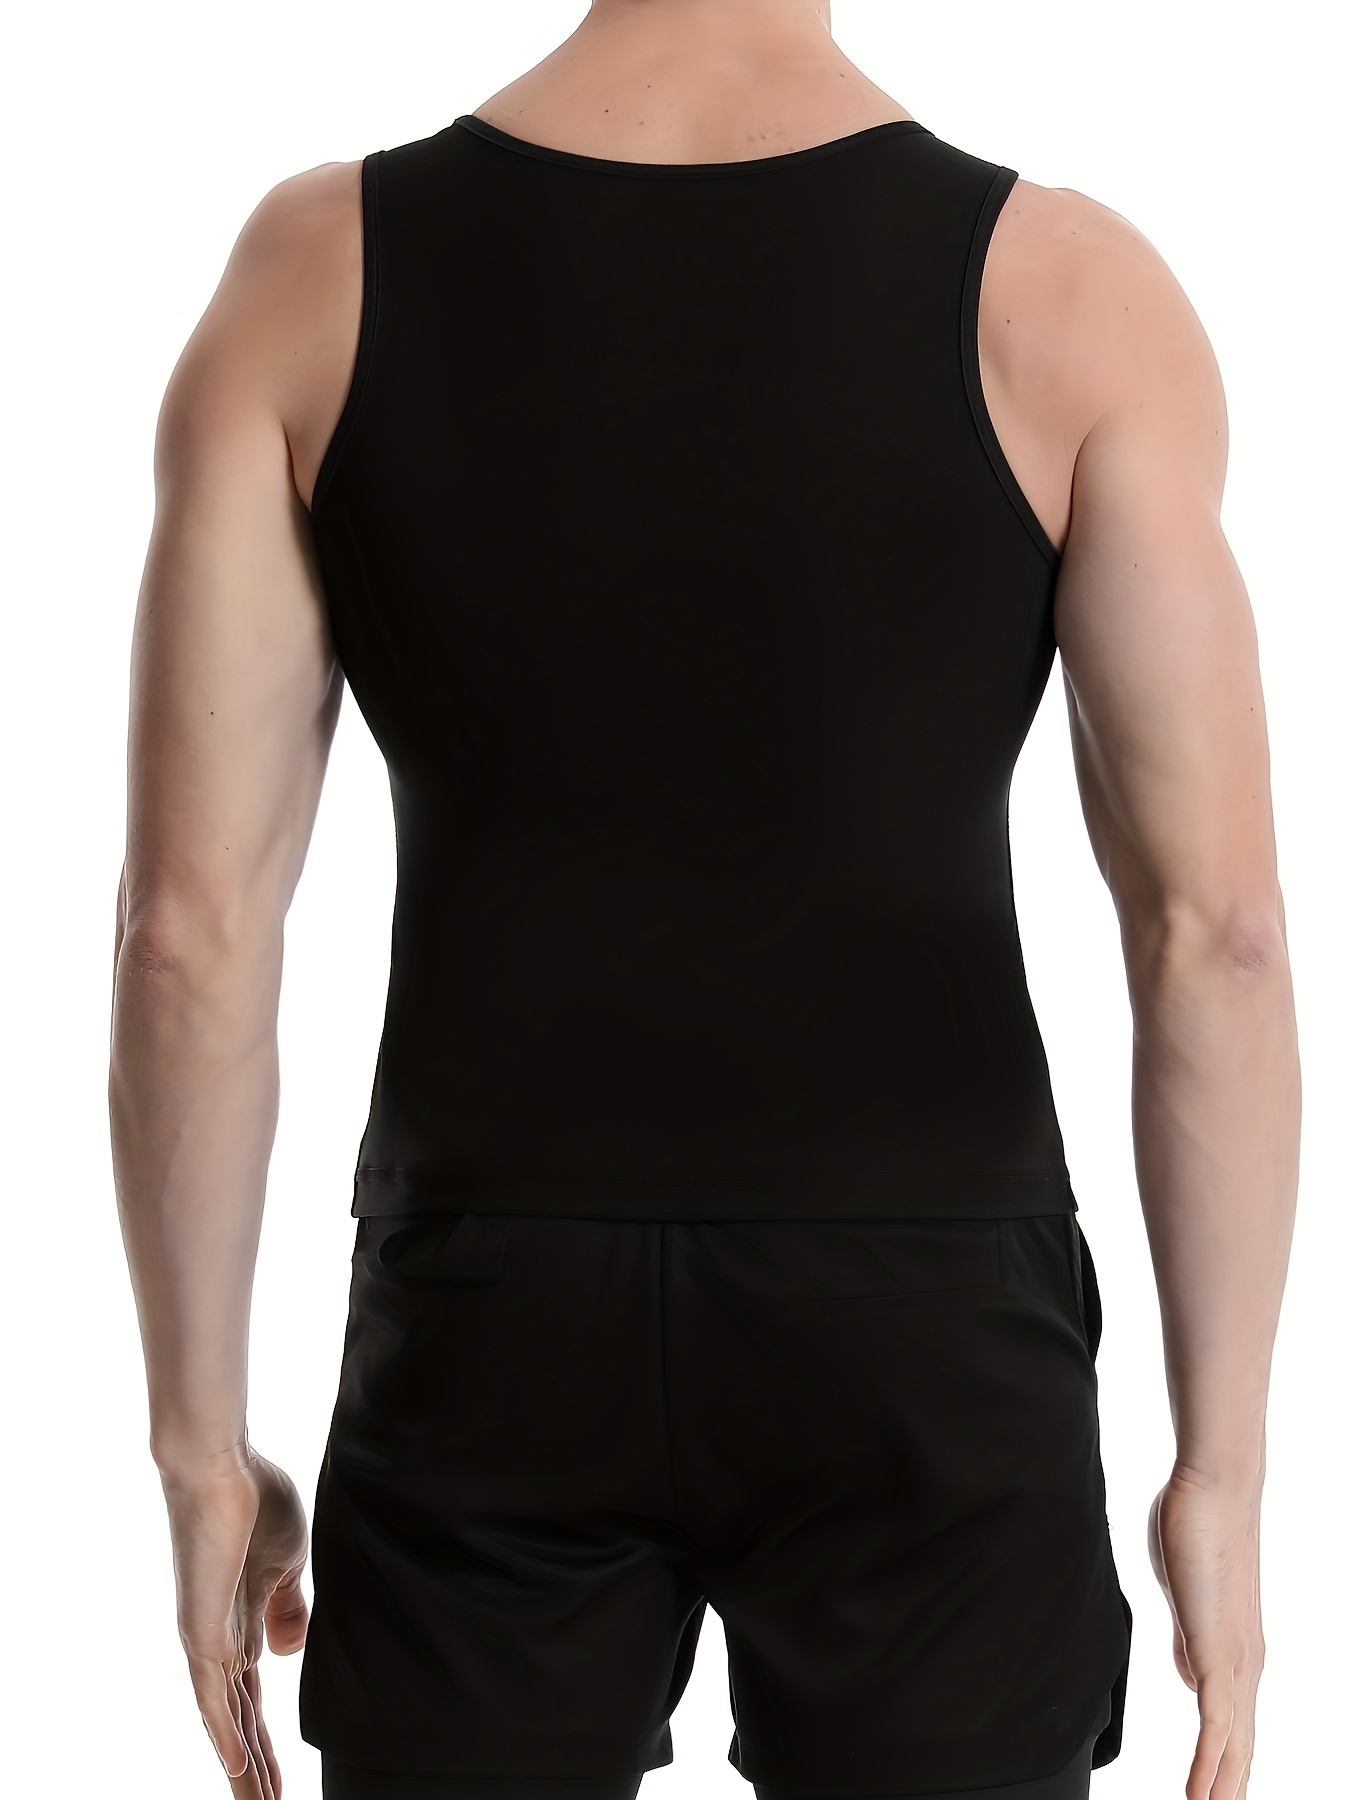  2 Pack Mens Compression Shirt For Body Shaper Slimming Vest Tight  Tummy Control Shapewear Tank Top